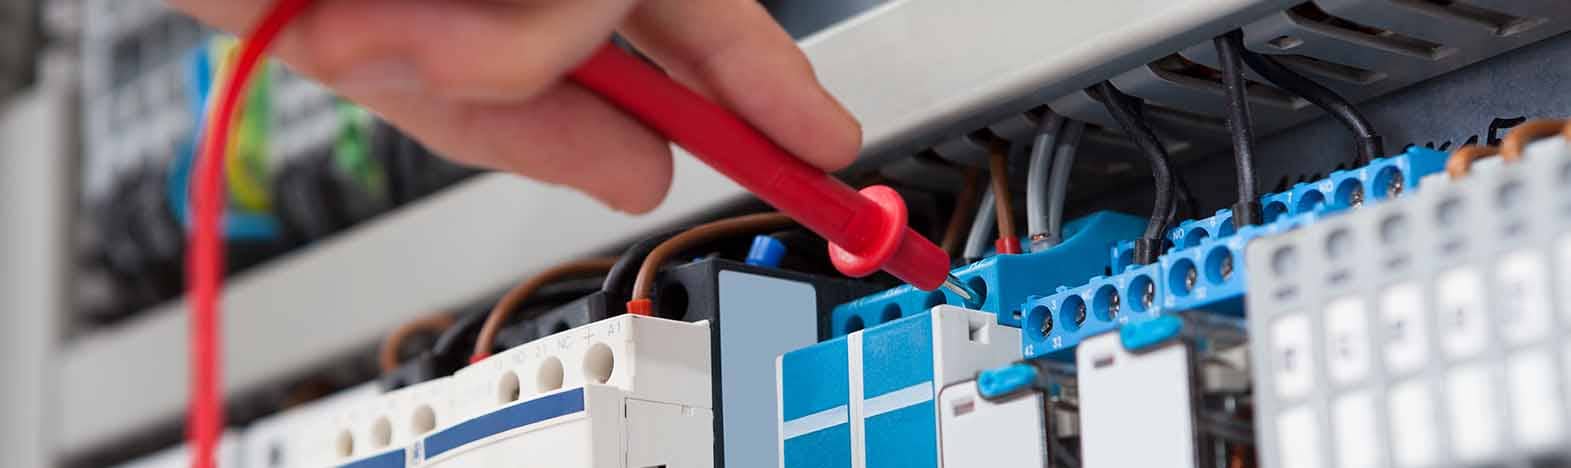 Beaufort Electrician, Electrical Contractor and Commercial Electrician